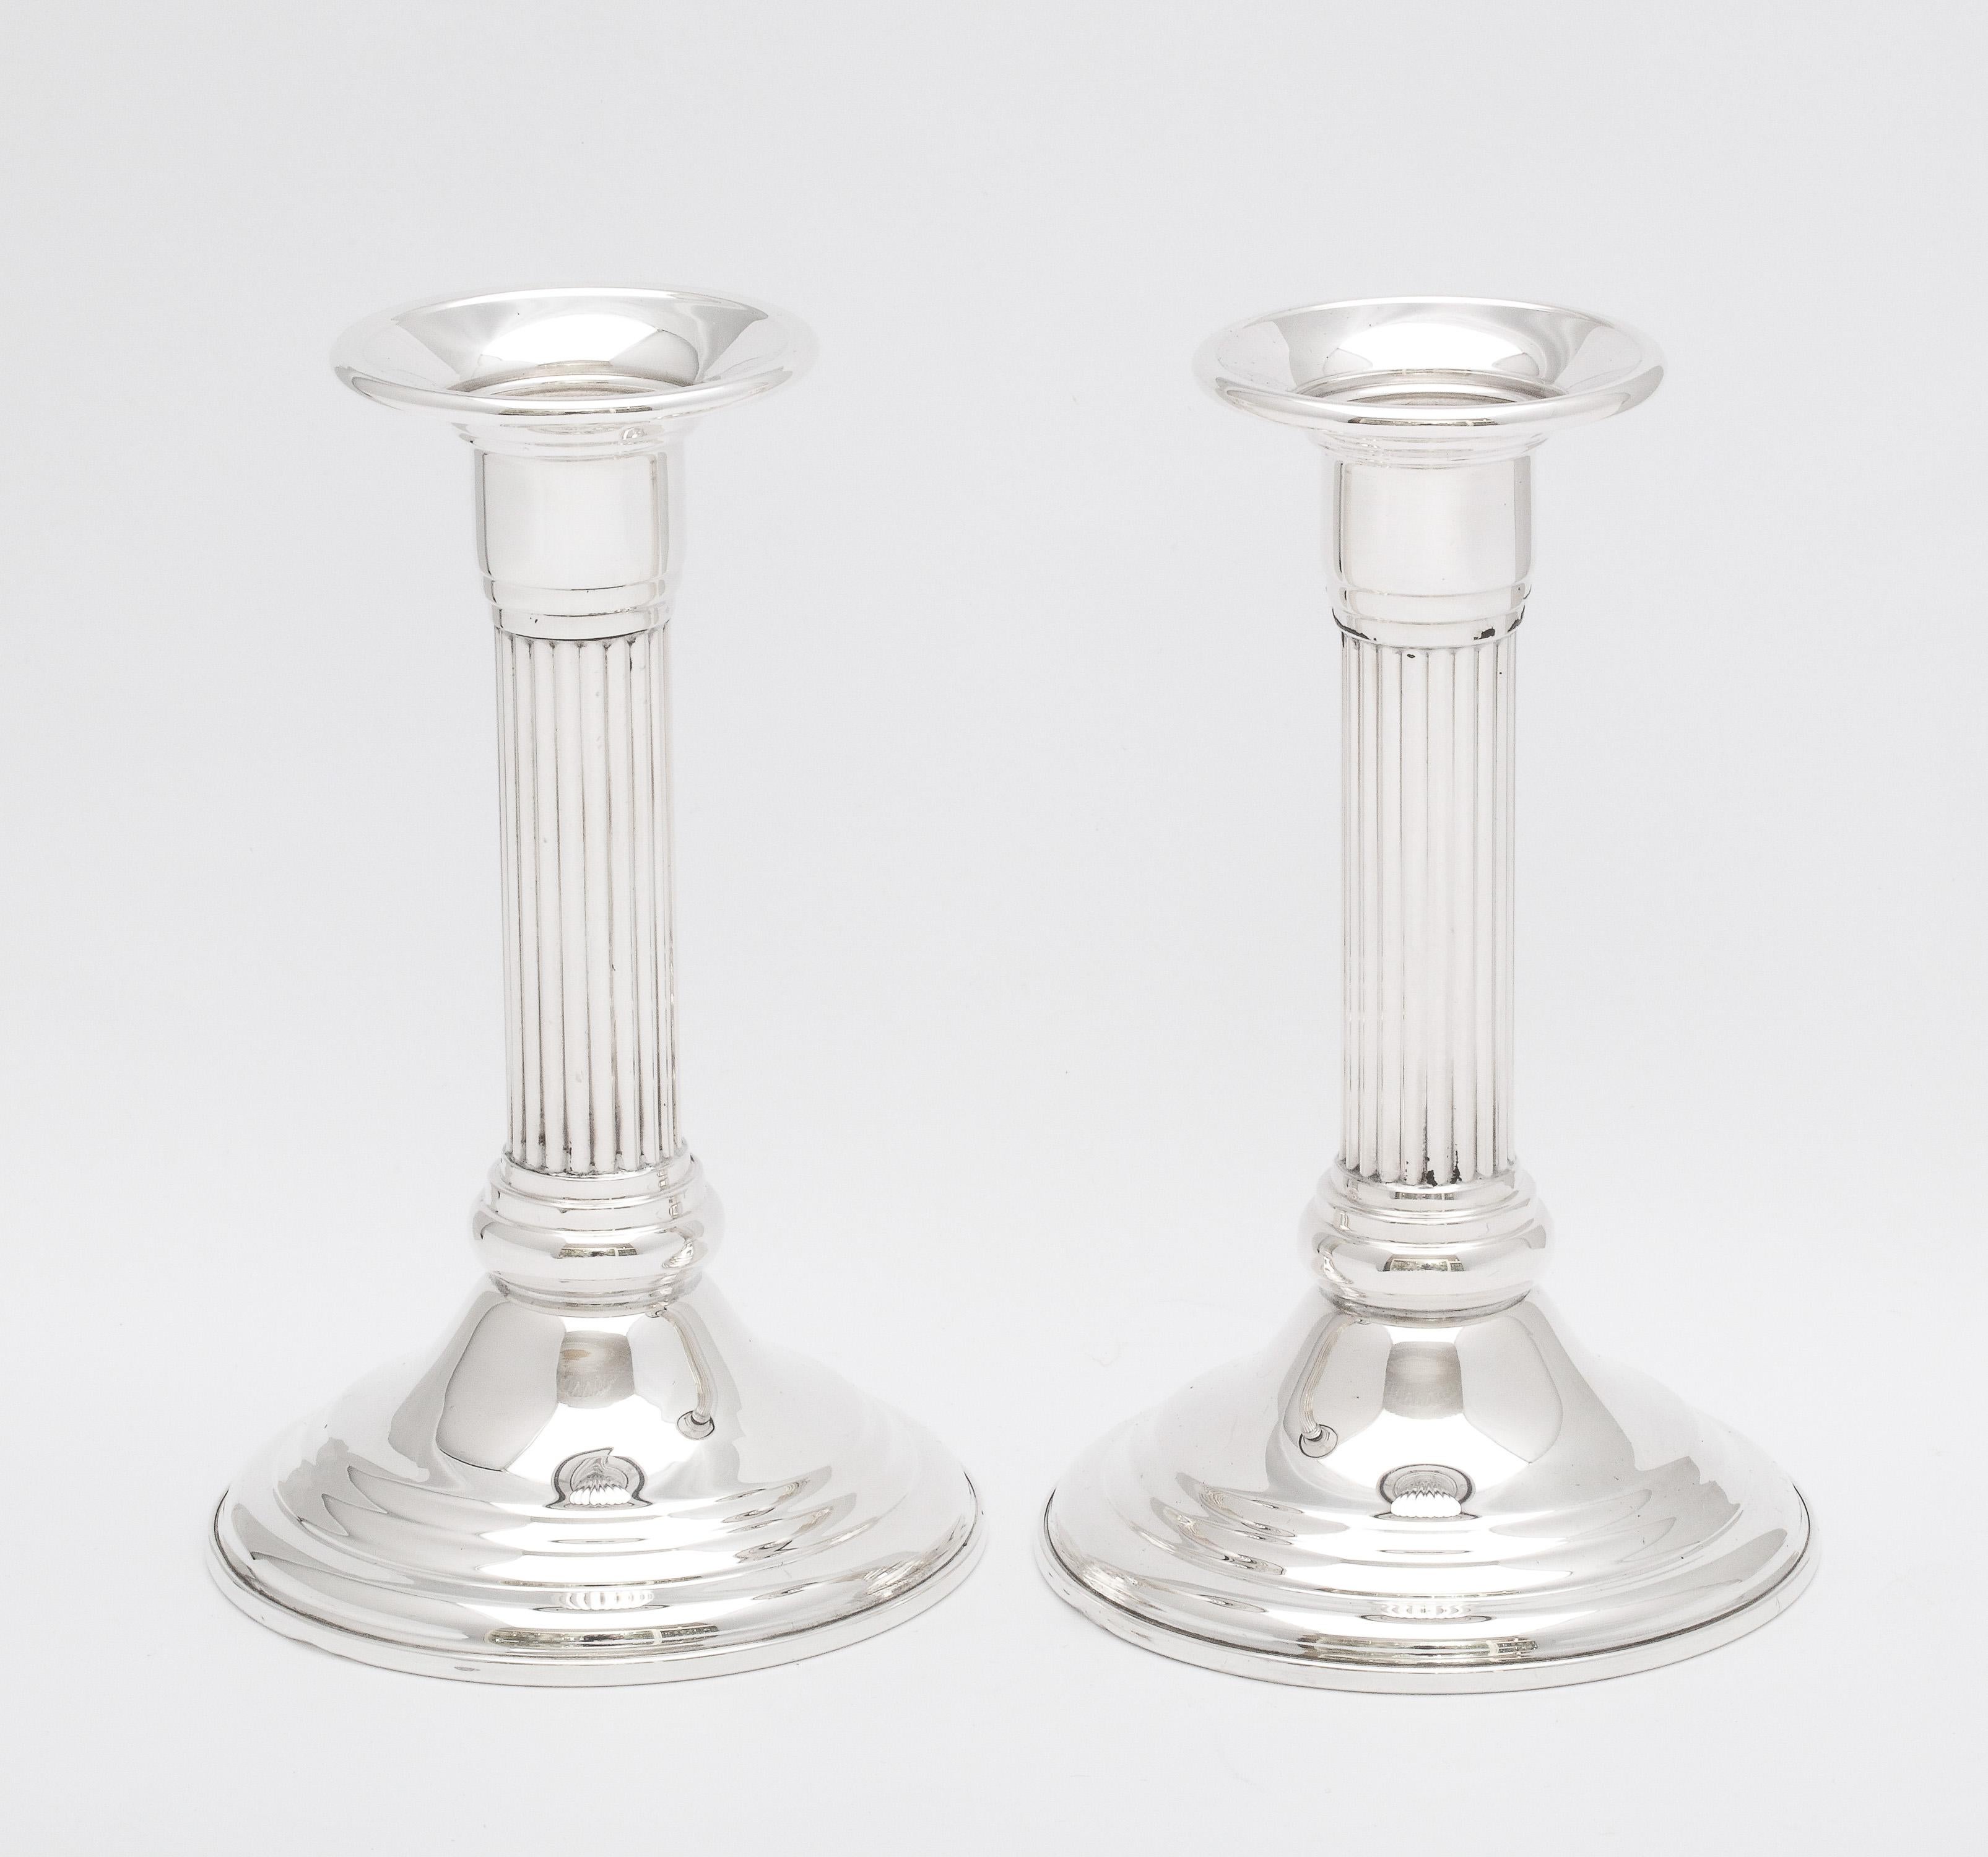 Pair of mid-century, sterling silver, Neoclassical-style, column-form candlesticks, Empire Silver Co., New York, Ca. 1960's. Each measures 5 3/4 inches tall x 3 1/2 inches diameter across base. Columns are fluted in design. Weighted. Dark areas in